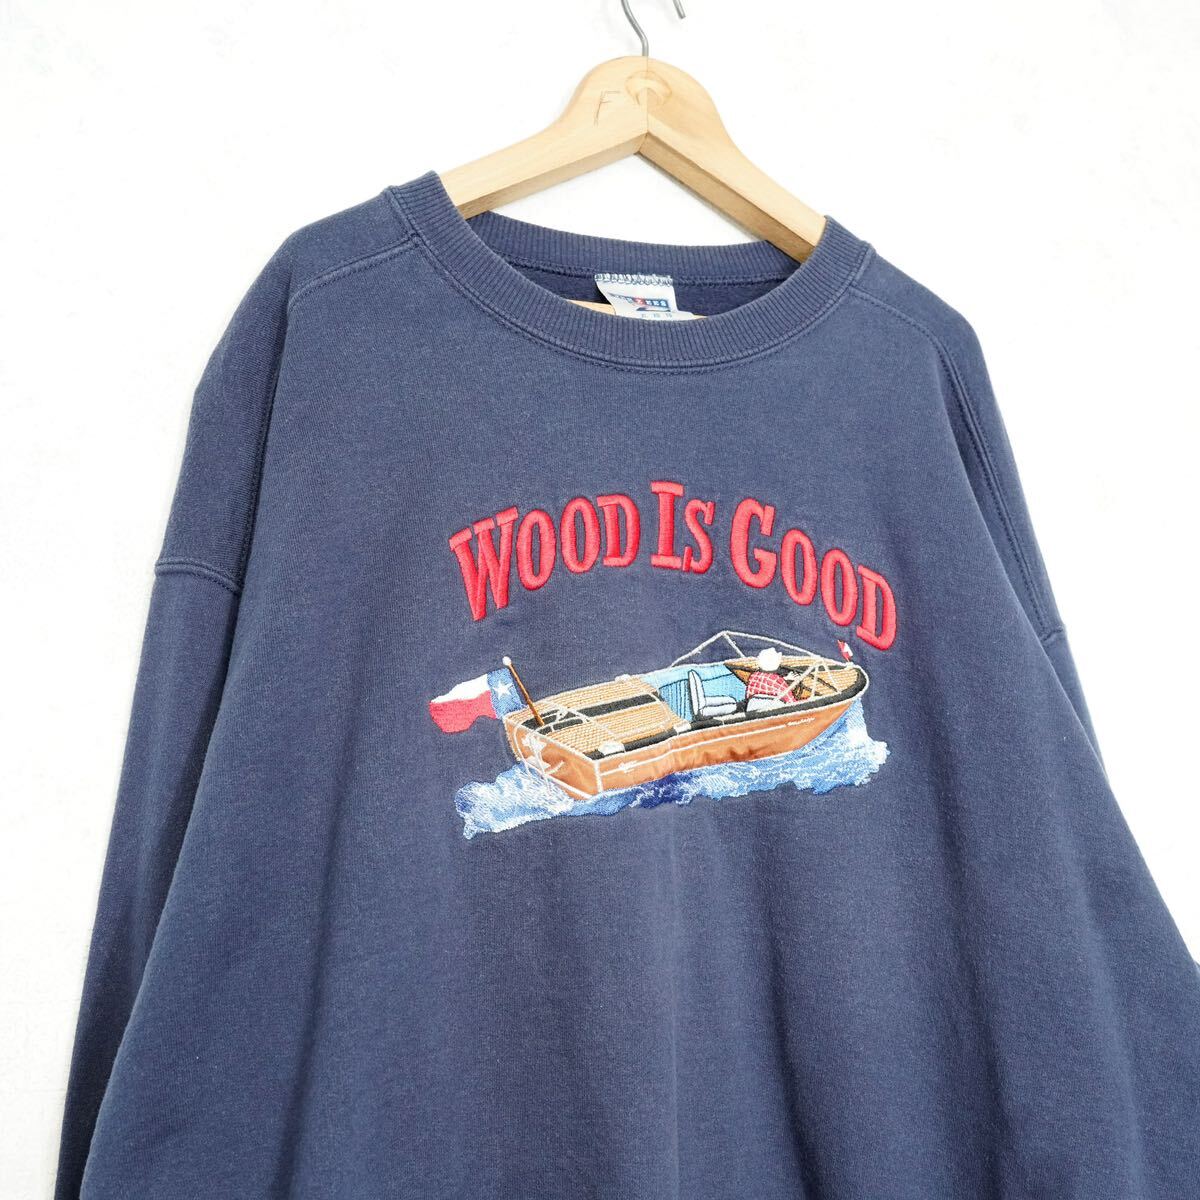 USA VINTAGE JERZEES BOAT EMBROIDERY DESIGN SWEAT SHIRT/アメリカ古着ボート刺繍デザインスウェット